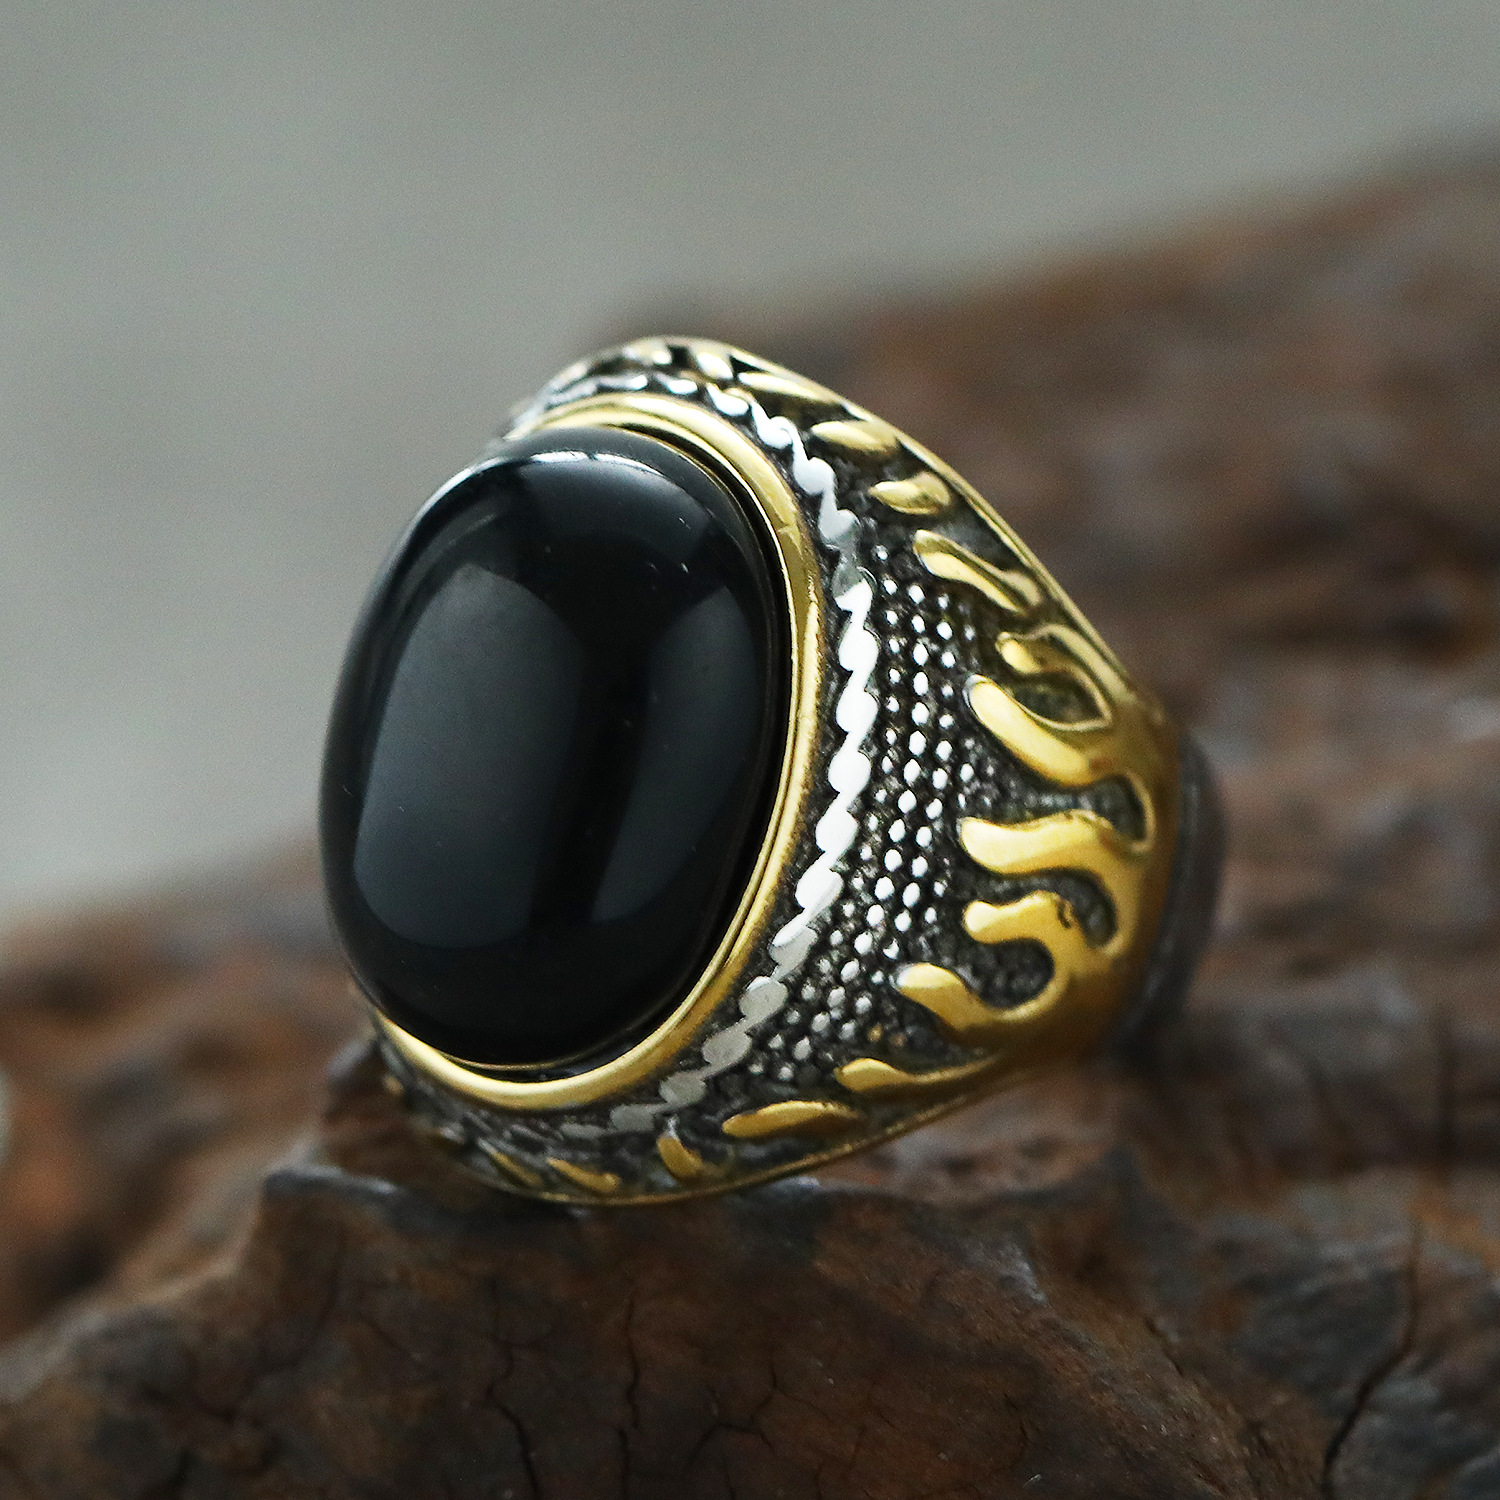 Steel and gold black stone